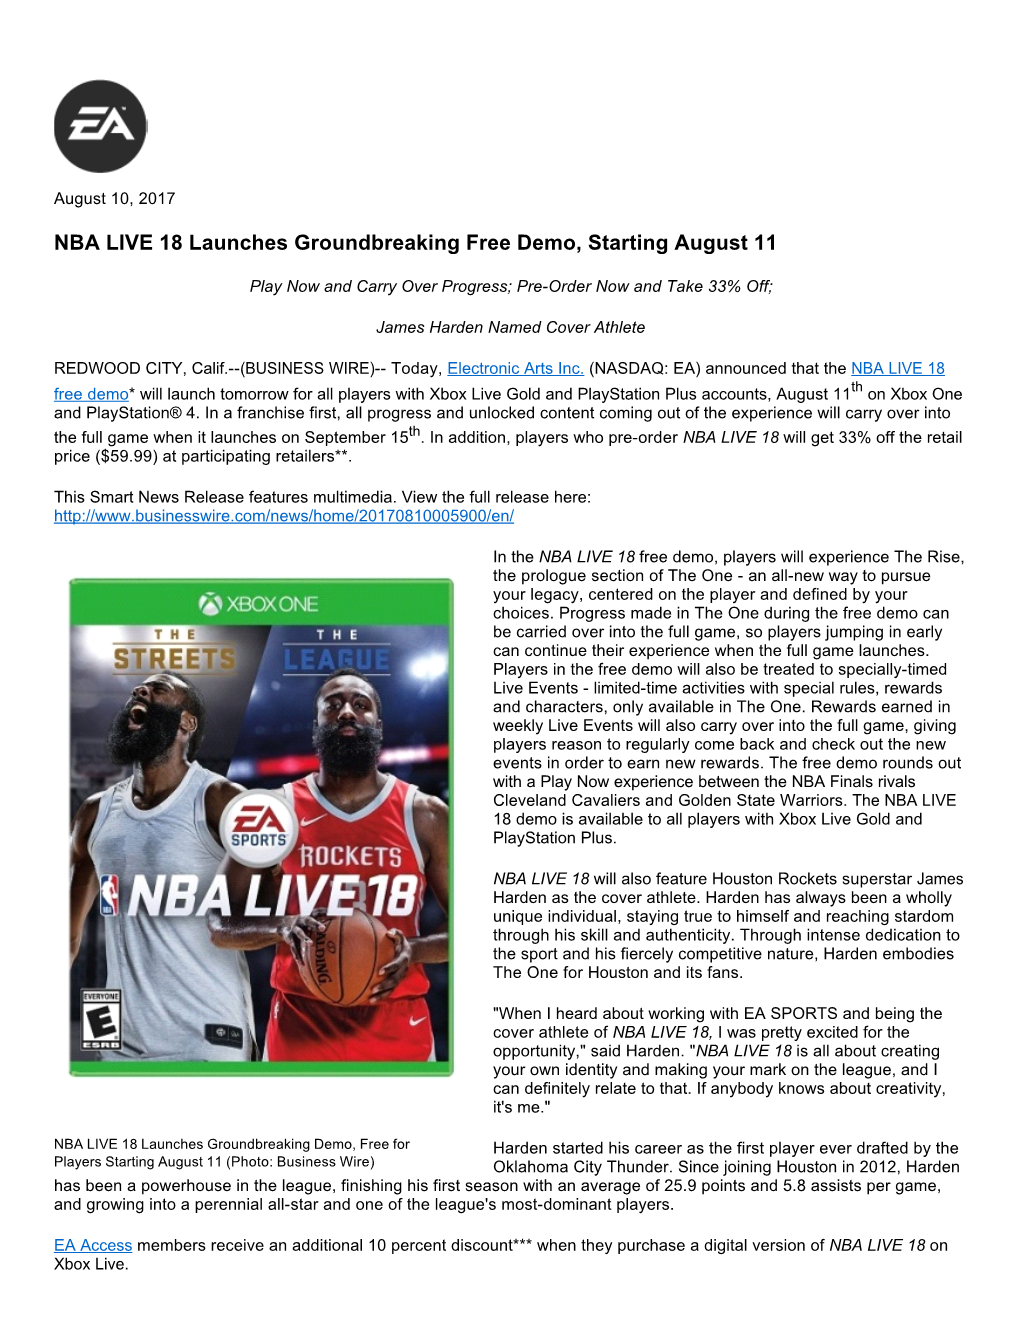 NBA LIVE 18 Launches Groundbreaking Free Demo, Starting August 11